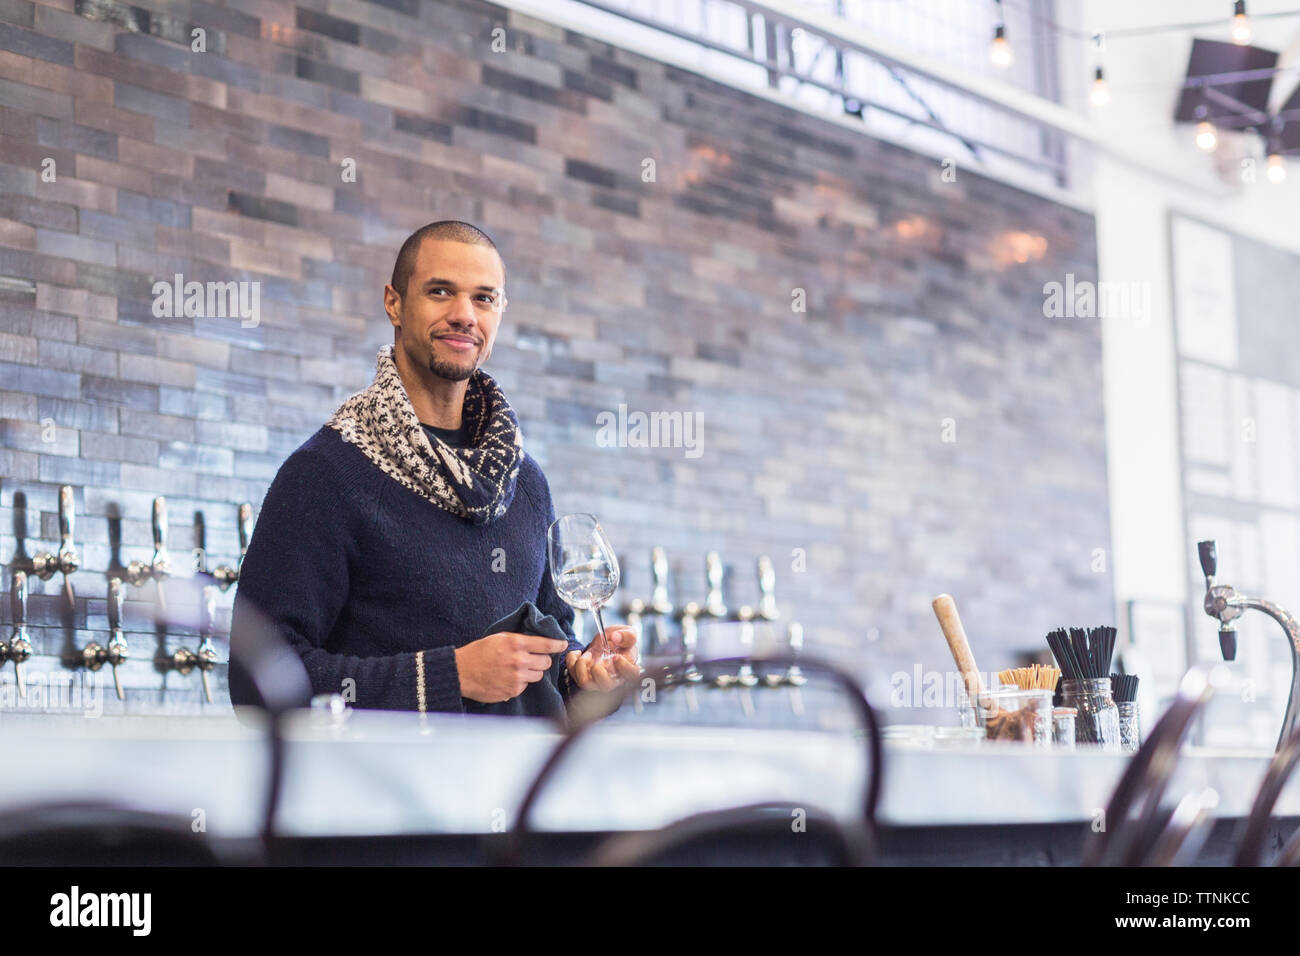 Bartender looking away while holding wineglass at bar counter in restaurant Stock Photo